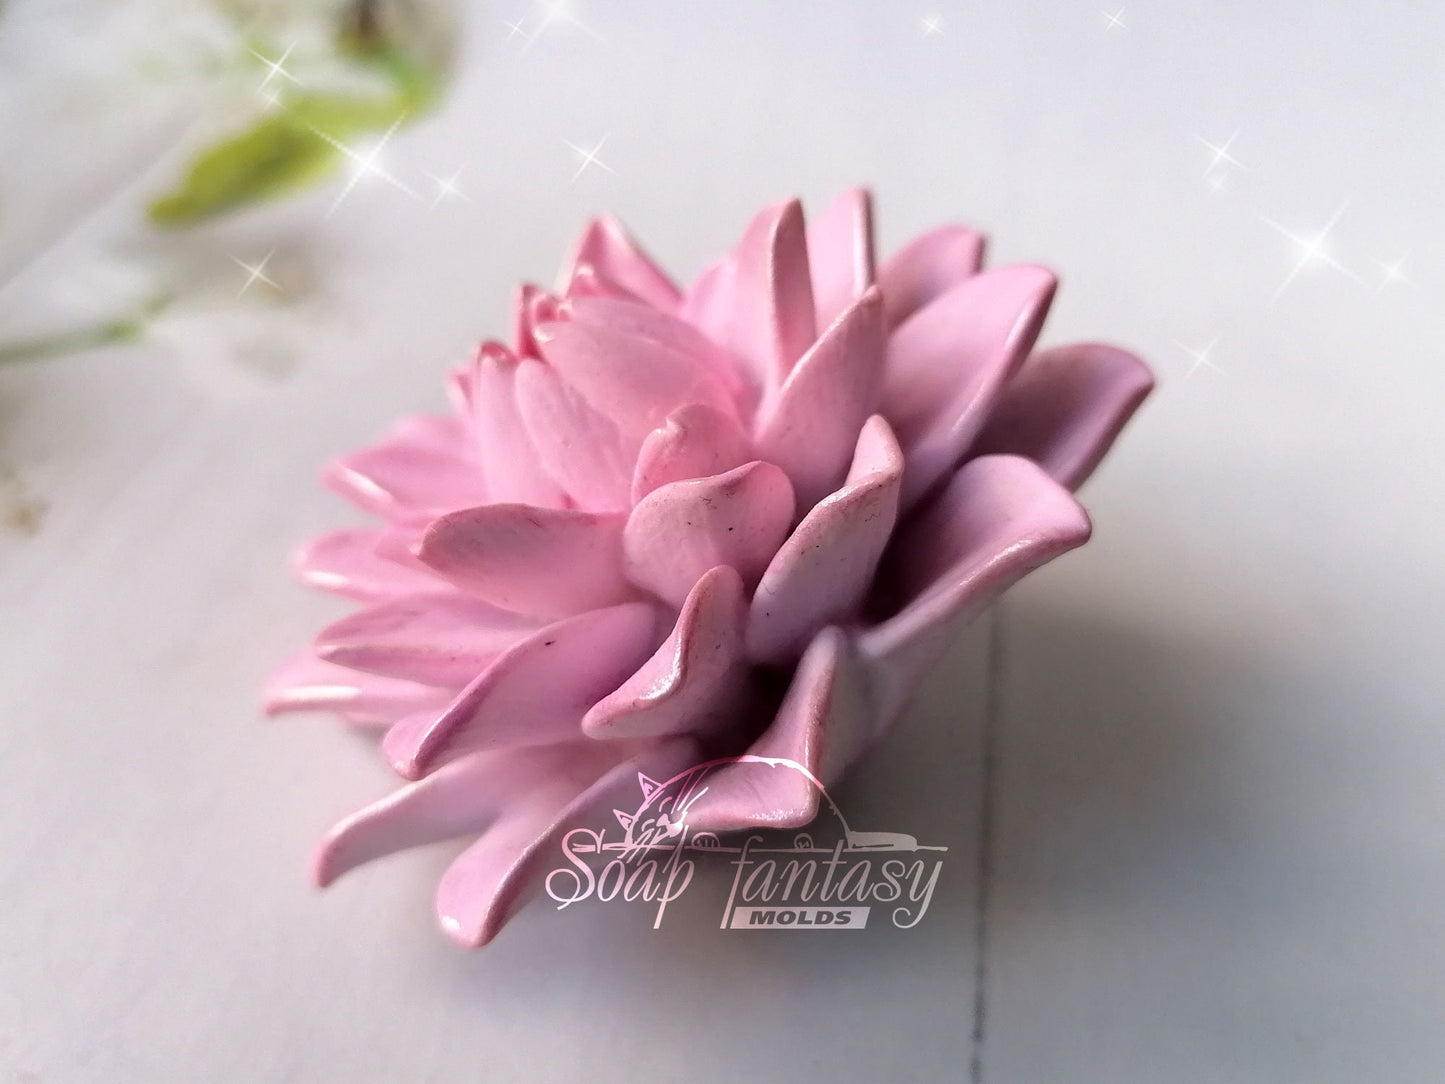 Dahlia "Purple star" flower silicone mold for soap making